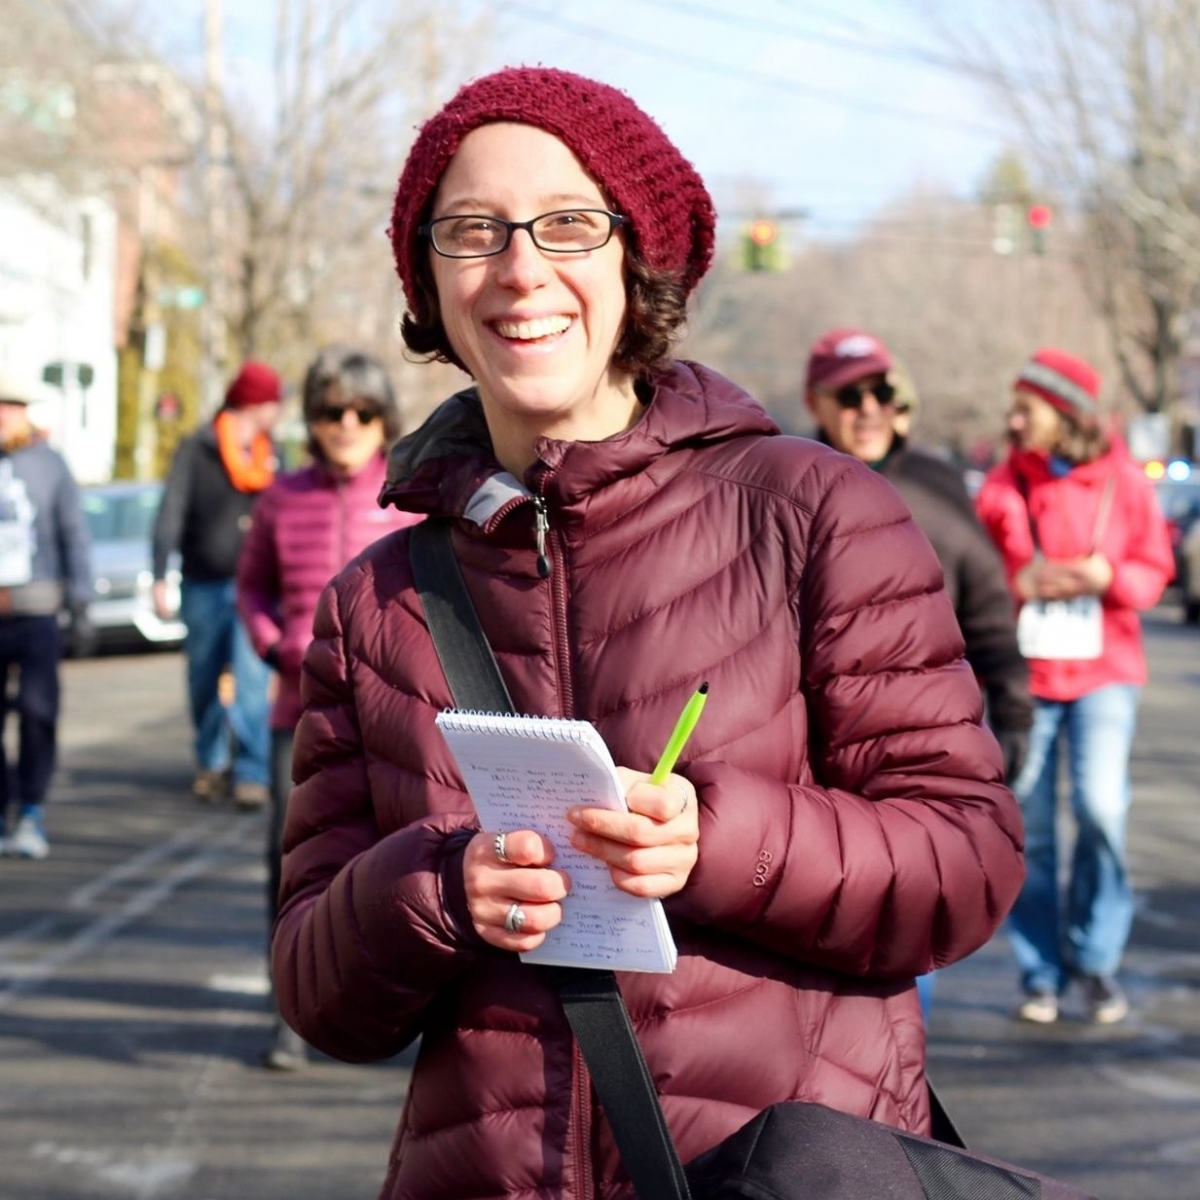 Smiling reporter in the field, wearing dark-rimmed glasses, red knit hat and puffy maroon coat, with black bag slung over shoulder, and holding notepad and pen.